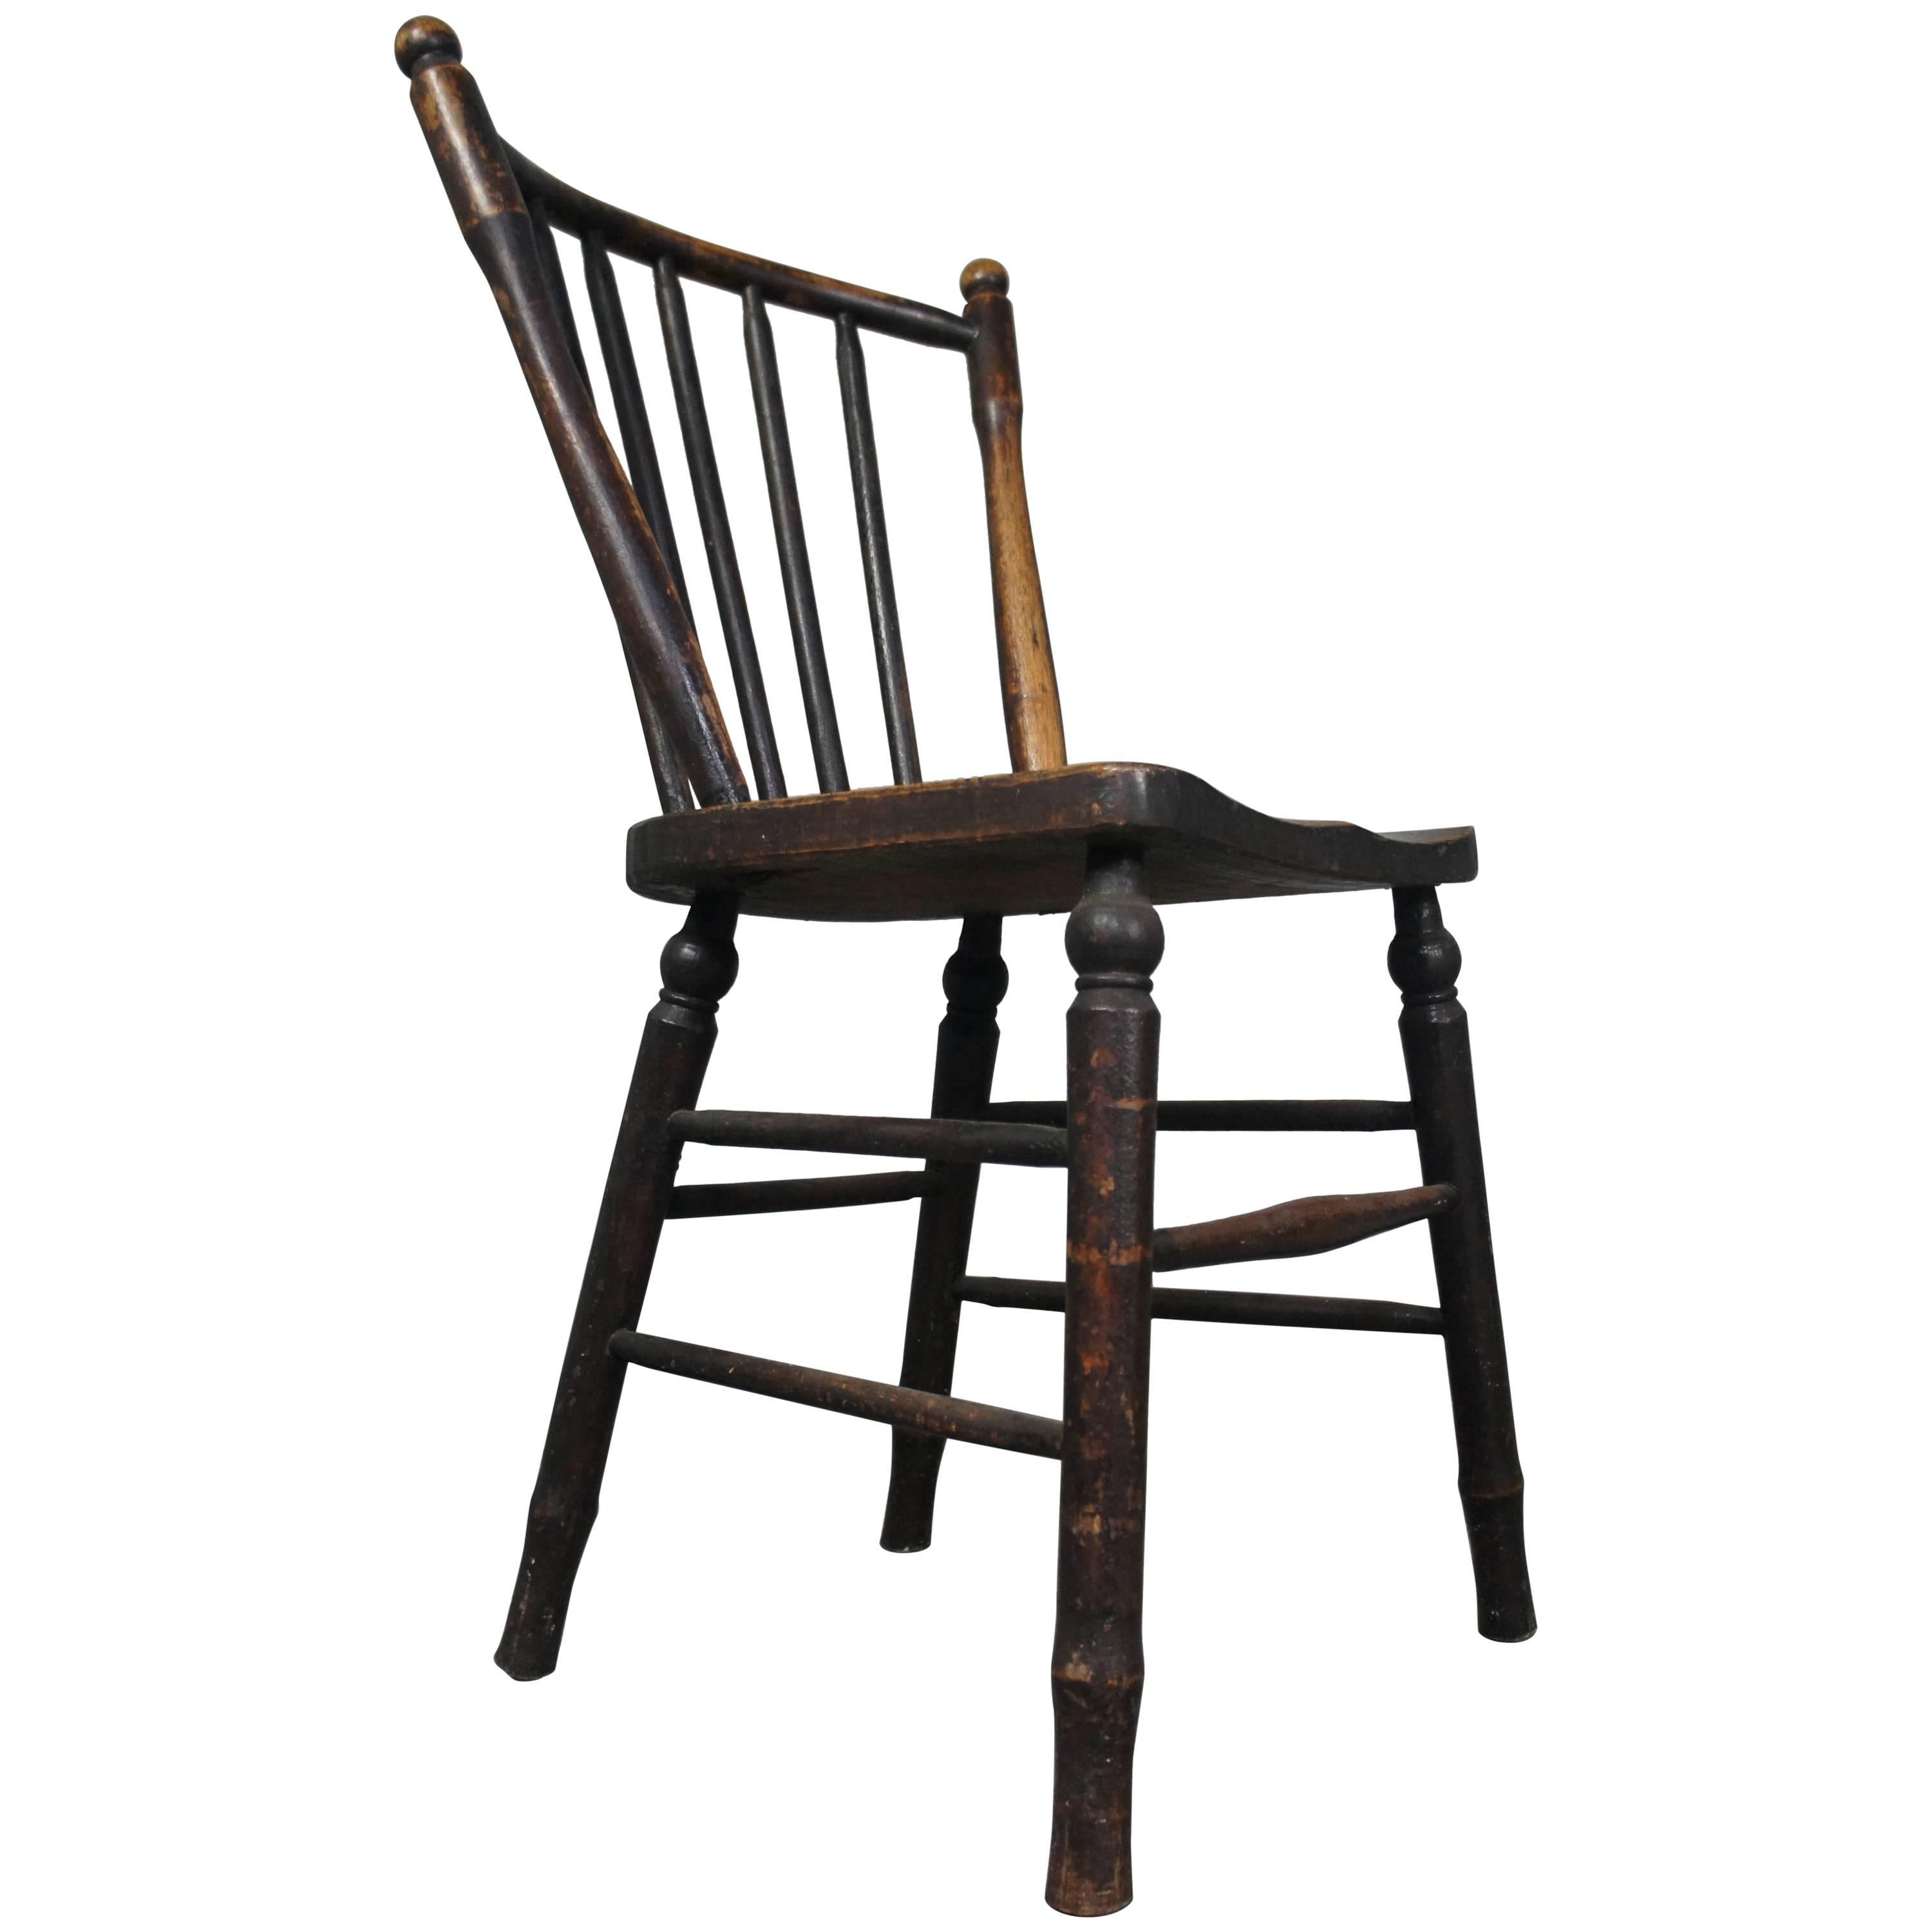 Early Irish Ash and Elm Stickback Dining Kitchen Chair